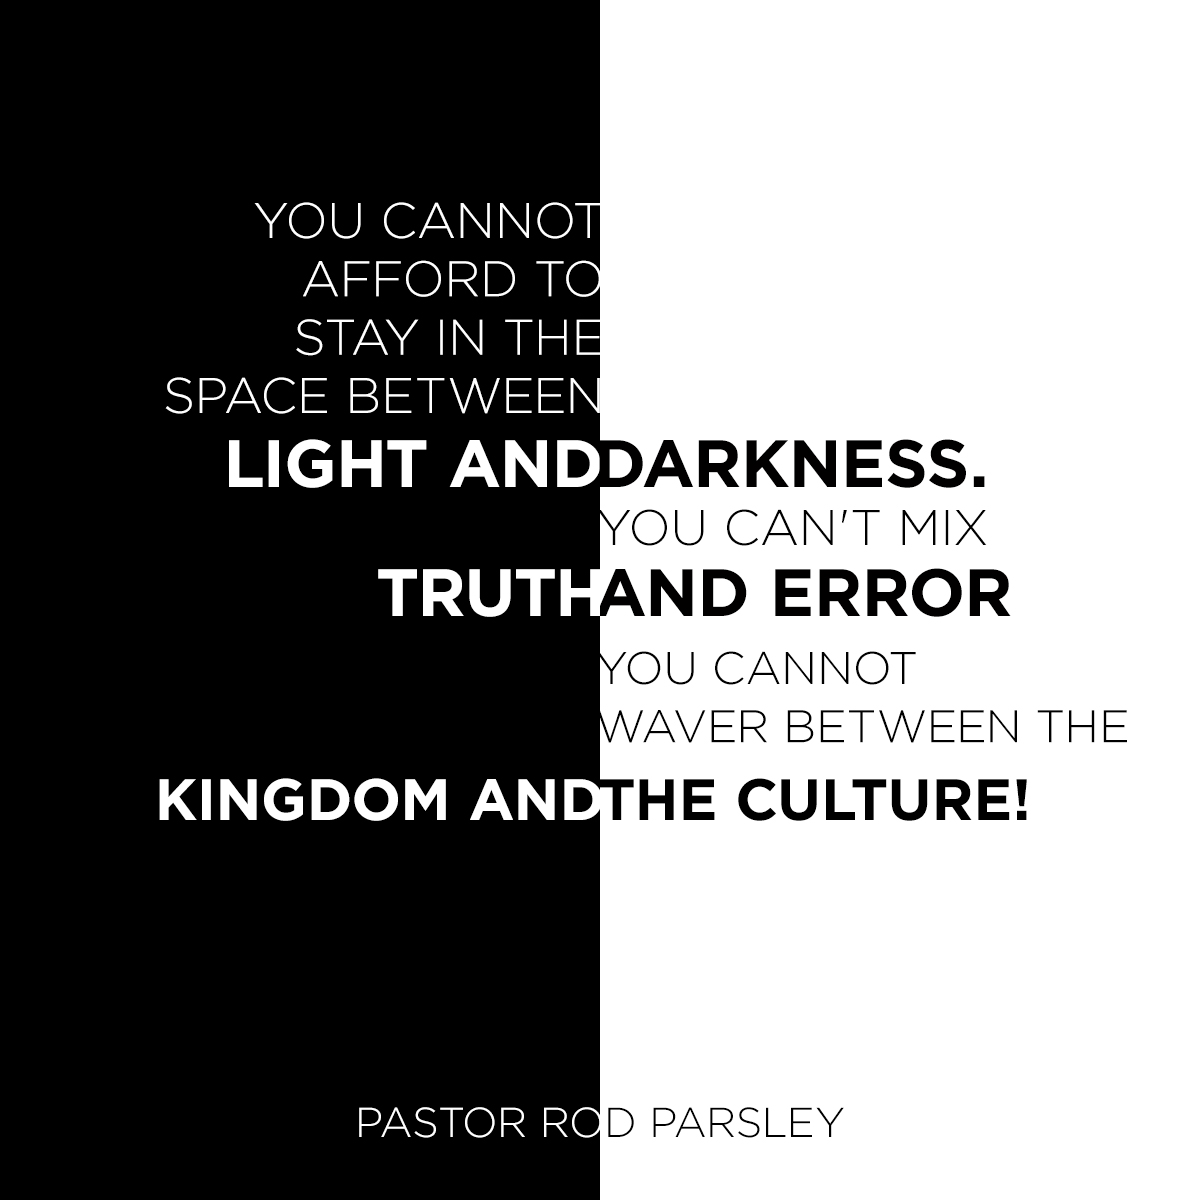 “You cannot afford to stay in the space between light and darkness. You can’t mix truth and error. You cannot waver between the Kingdom and the culture!” – Pastor Rod Parsley